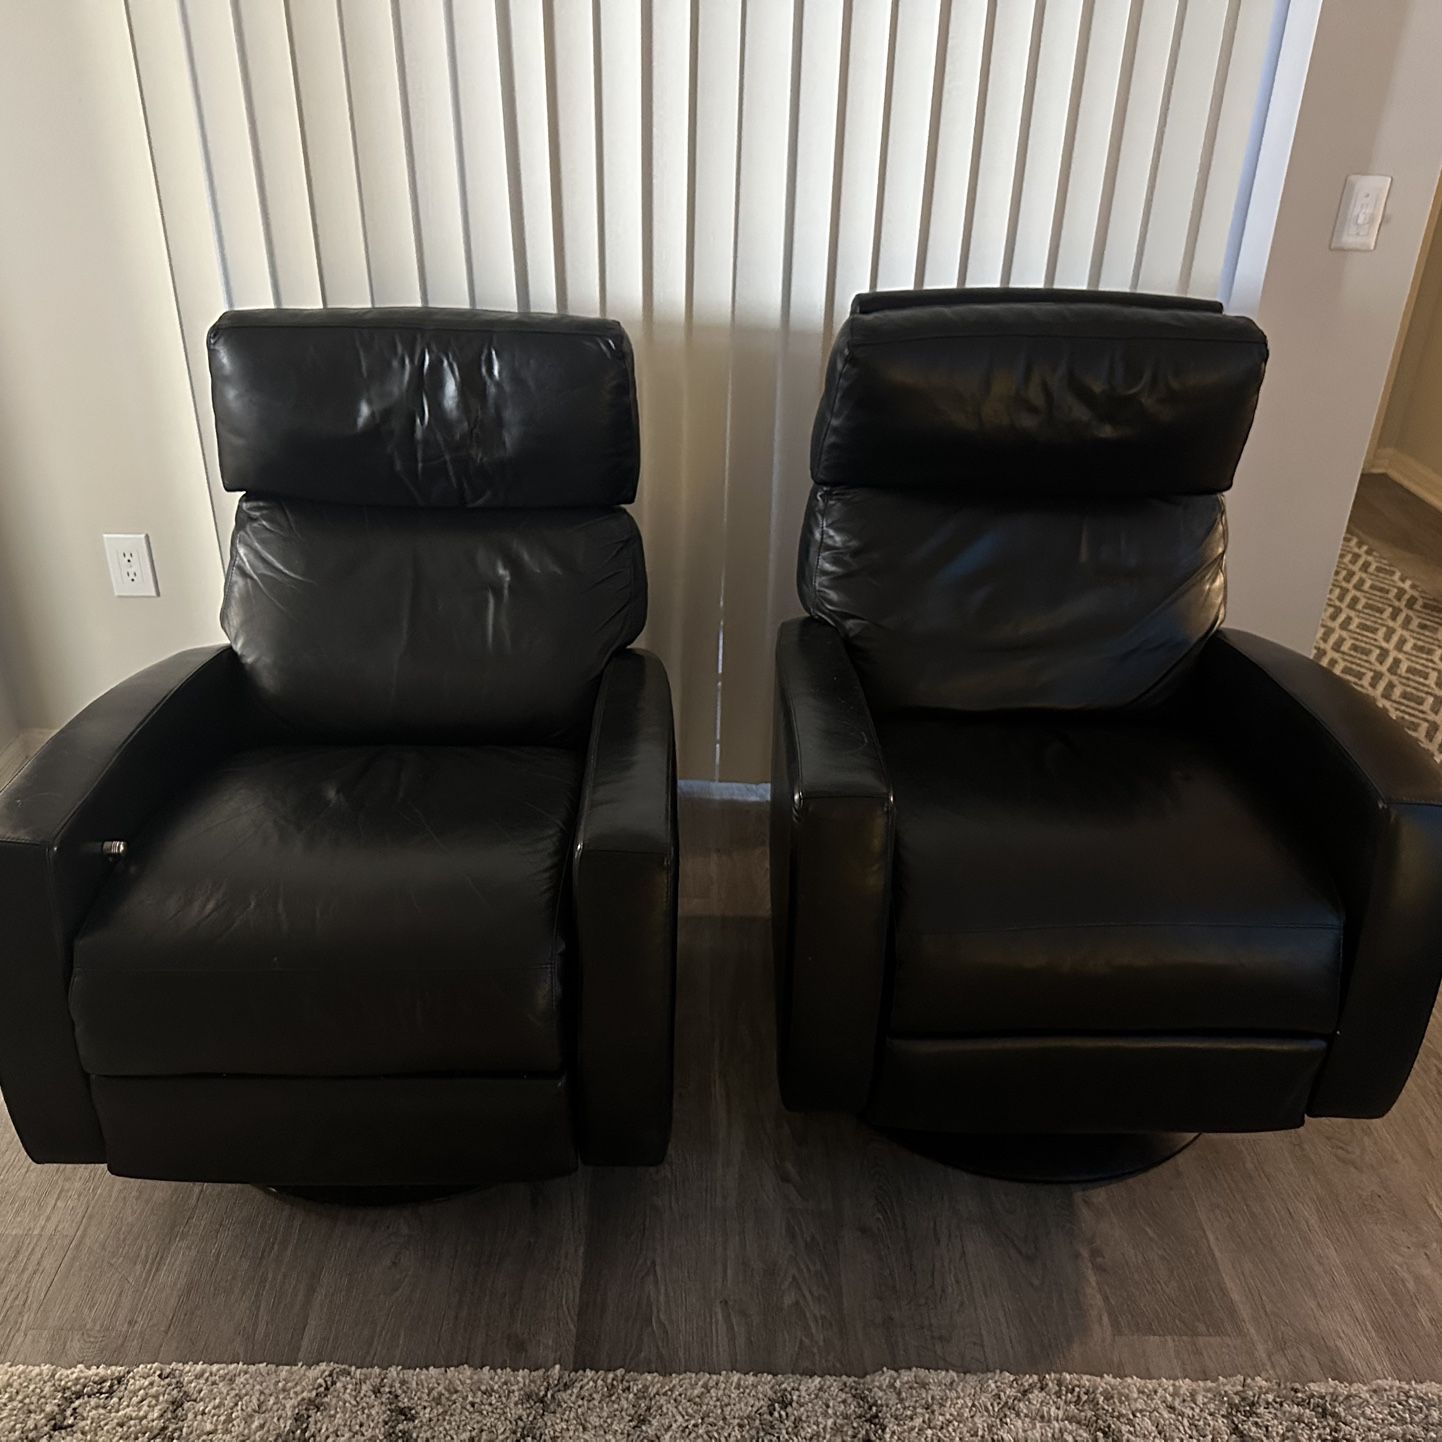 Real American LEATHER recliners 